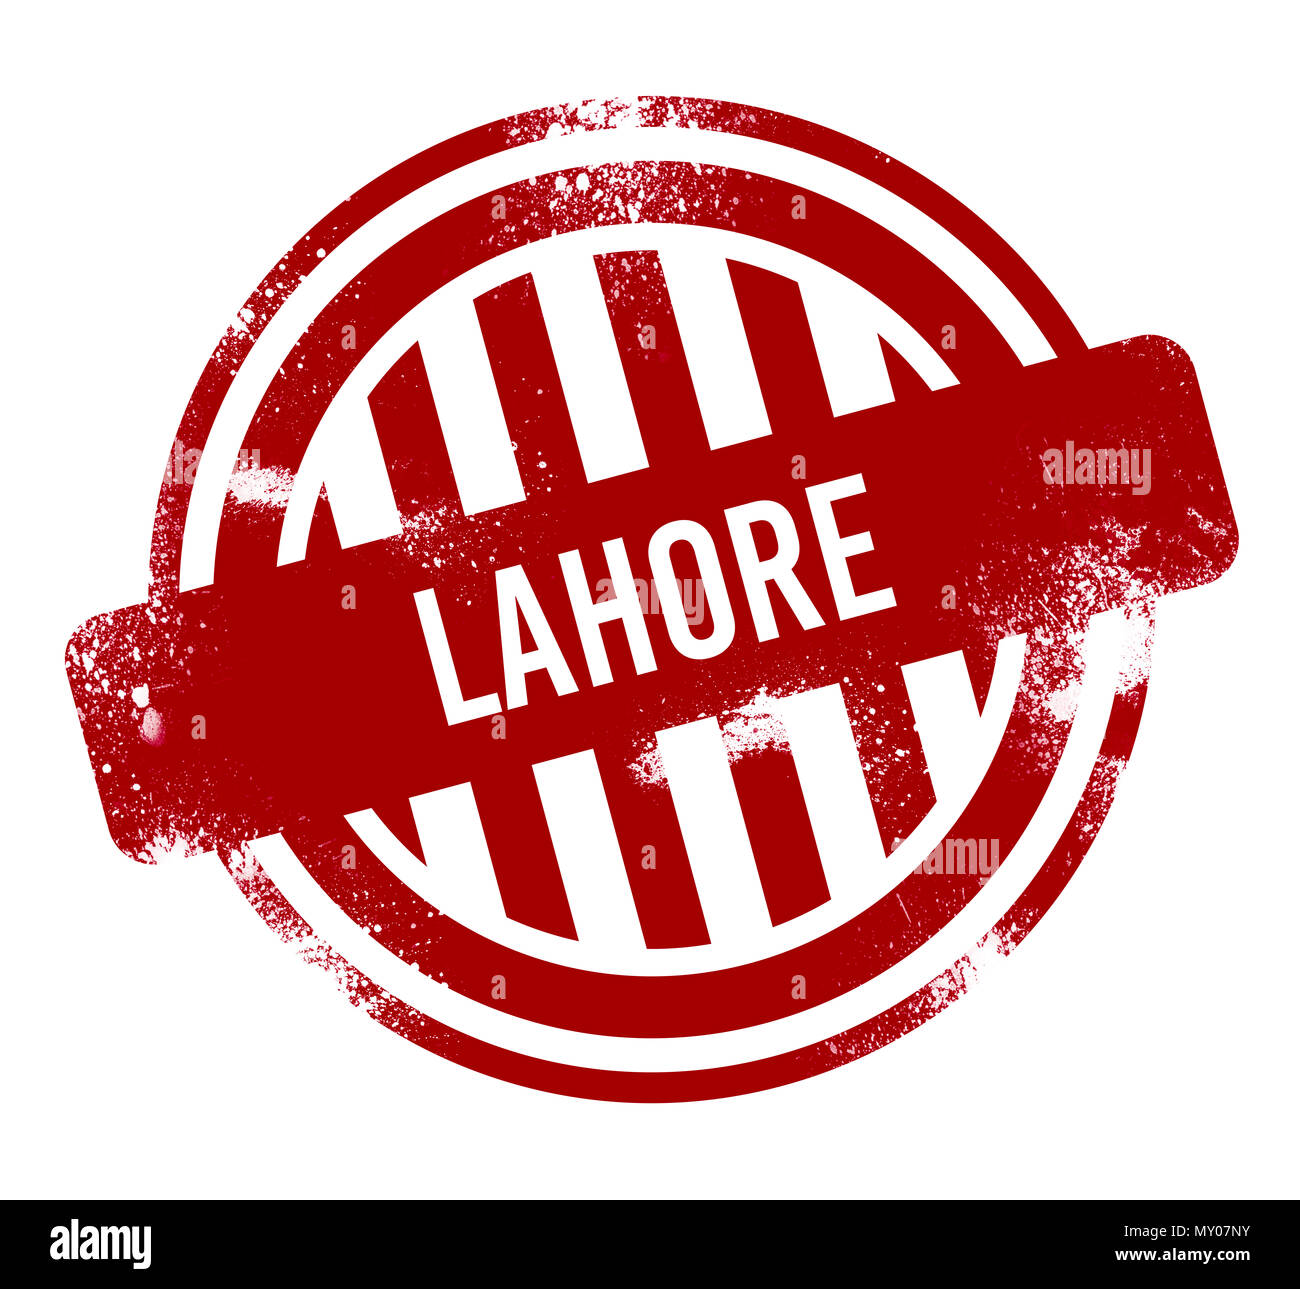 Lahore - grunge stamp, bouton rouge Banque D'Images